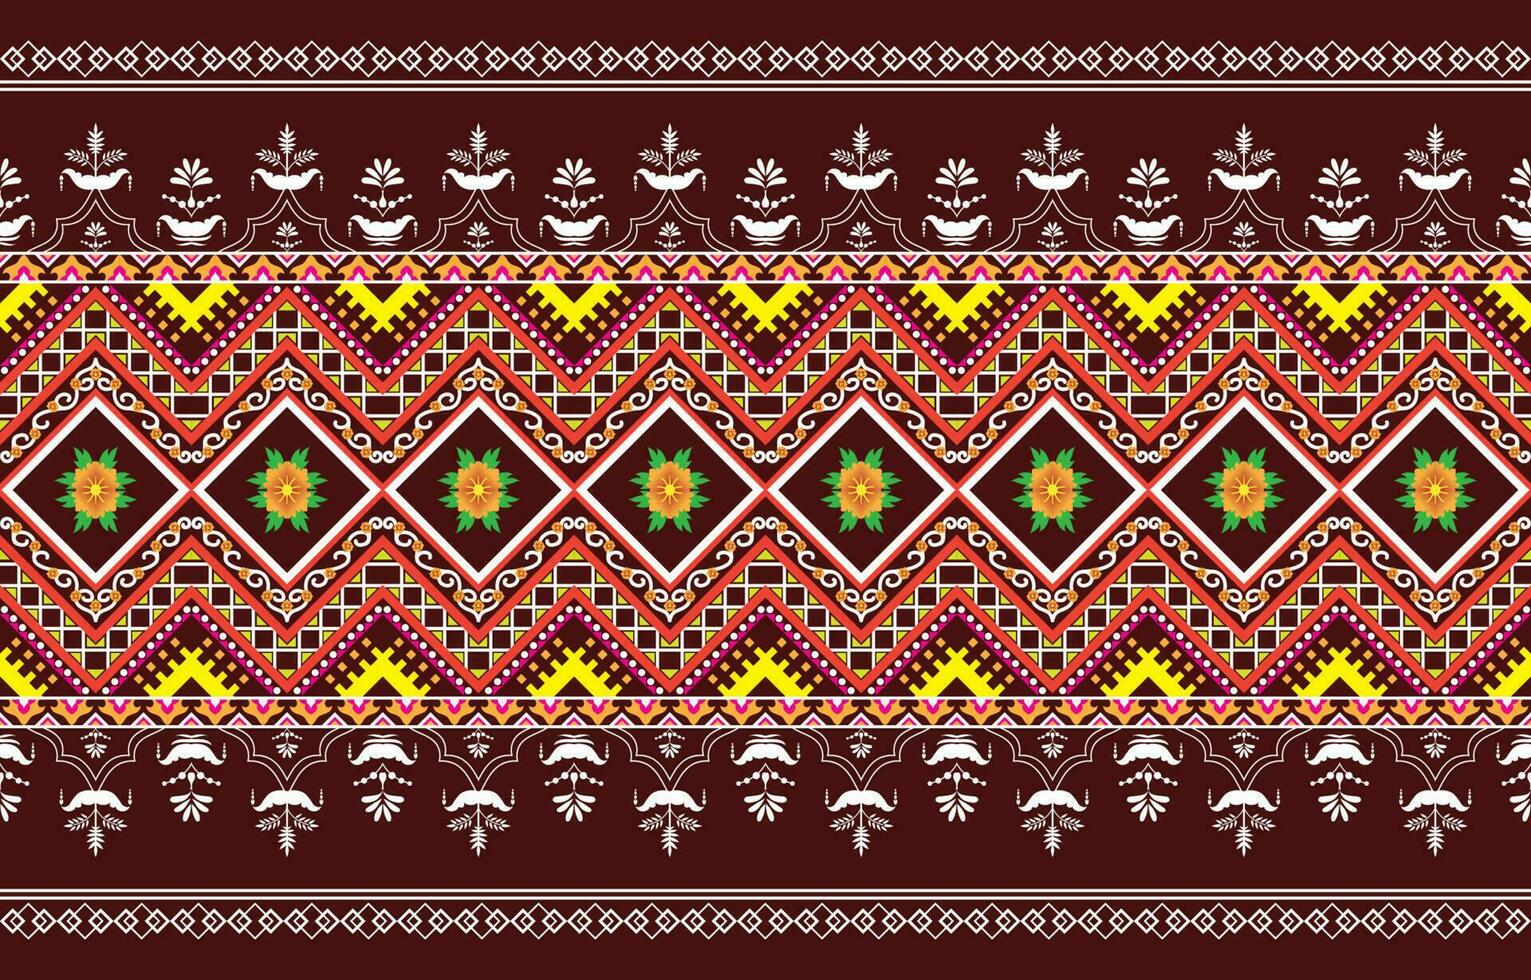 Geometric ethnic pattern. Design for fabric, curtain, background, carpet, wallpaper, clothing, wrapping, Batik, fabric,Vector illustration. vector